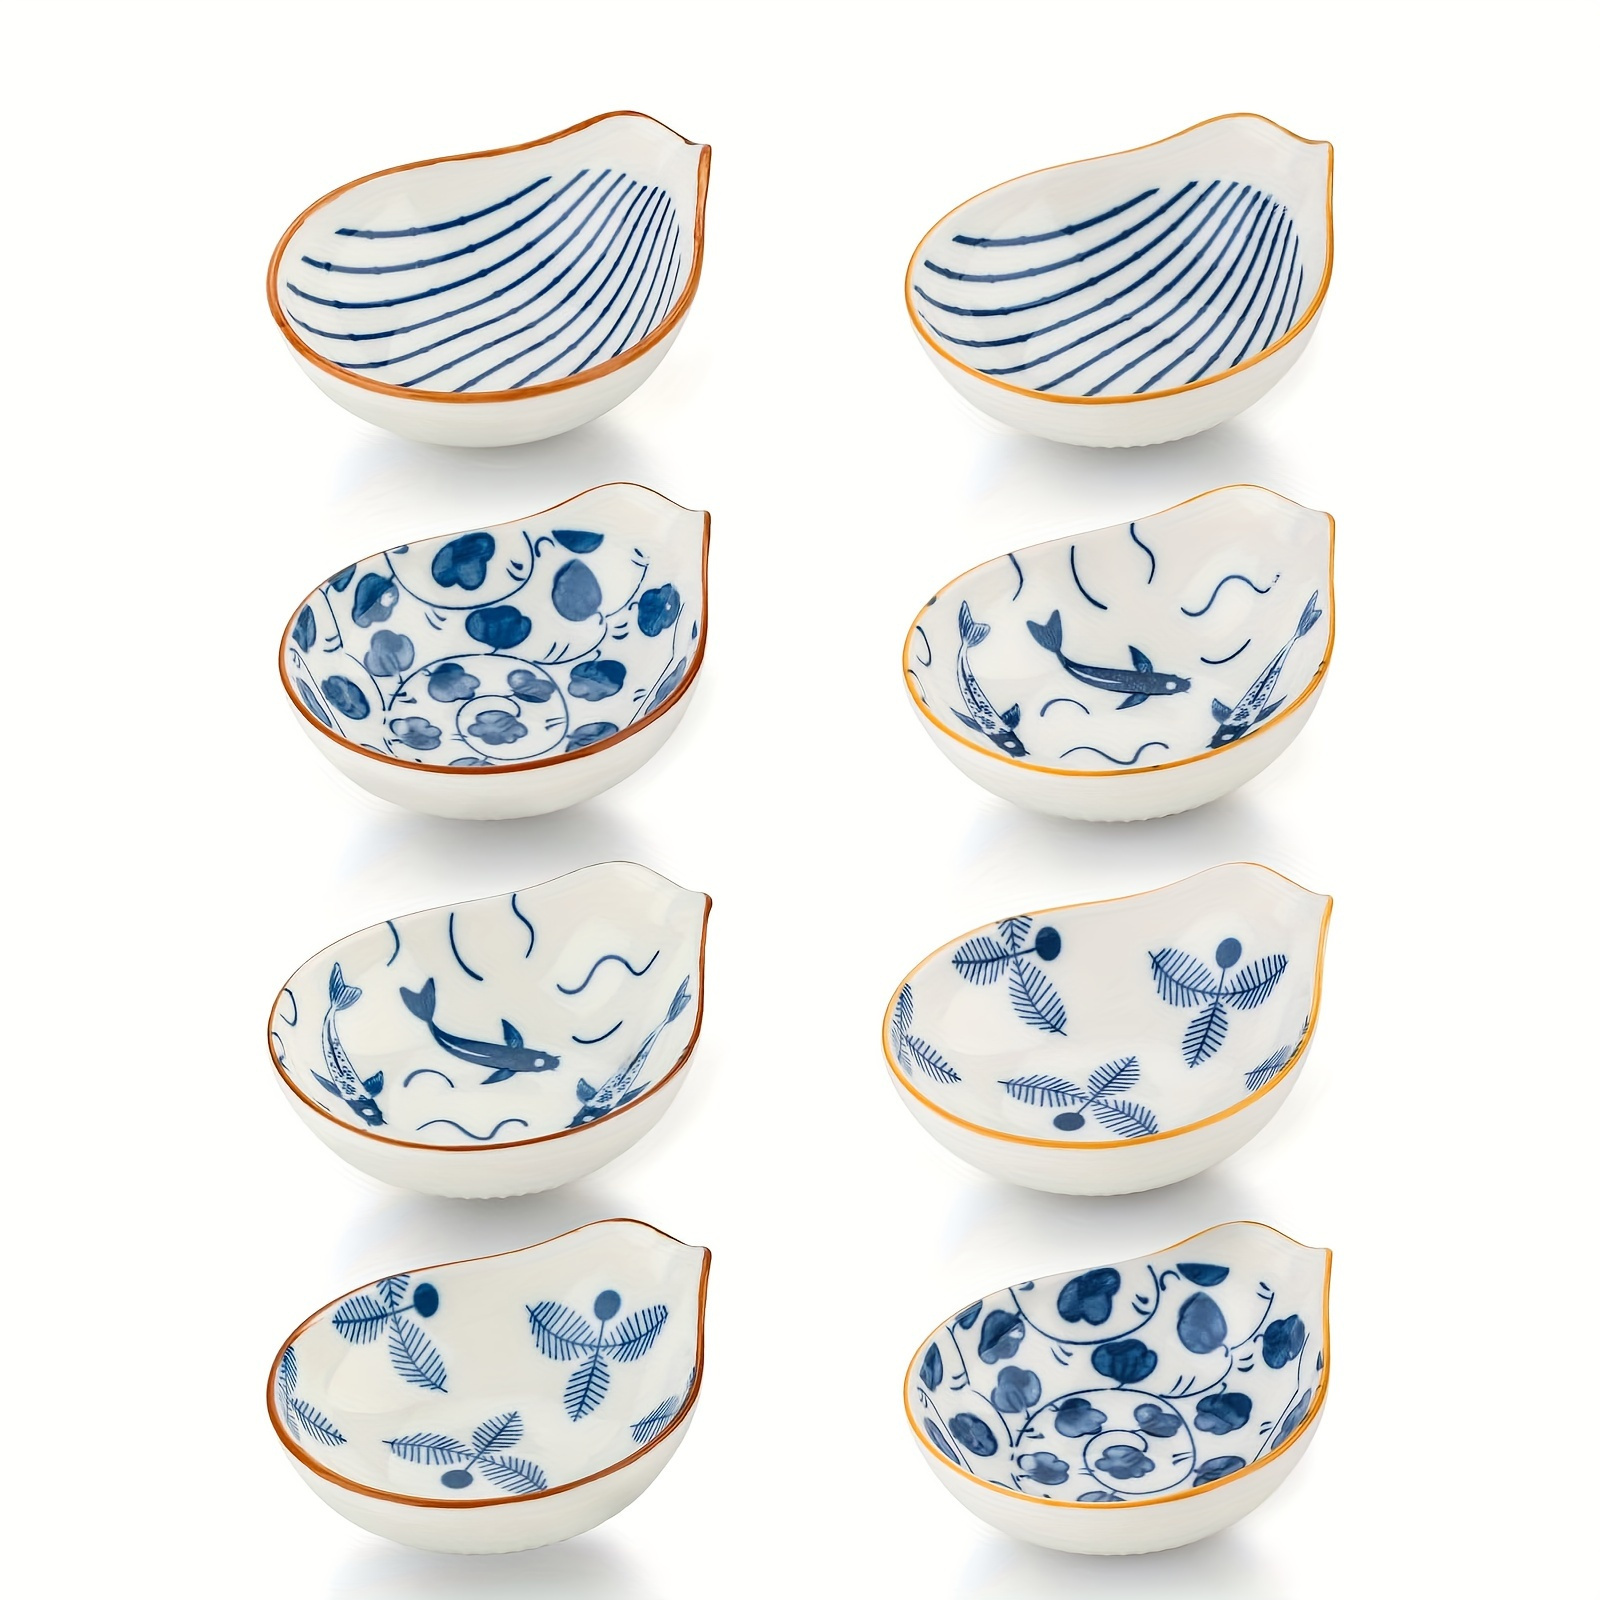 

8pcs Ceramic Dipping Dish, Sauce Bowls, Ceramic Soy Sauce Dish Set, Condiments Seasoning Dishes, Side Dishes, For Home Kitchen Restaurant Hotel, Kitchen Supplies, Tableware Accessories